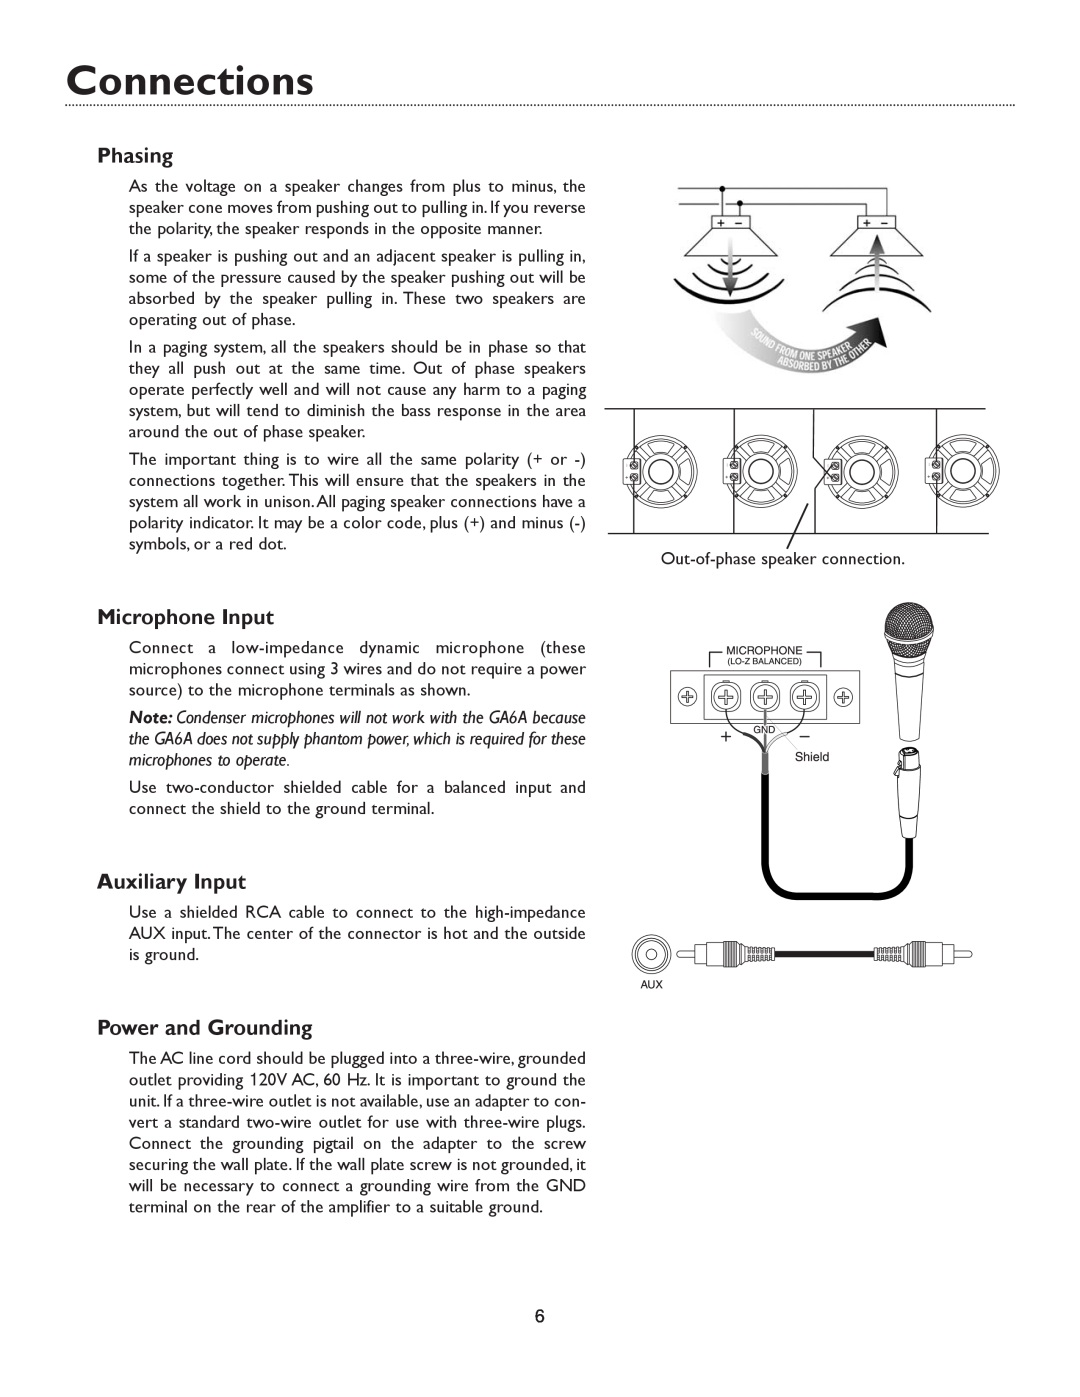 Bogen GA6A specifications Phasing, Microphone Input, Auxiliary Input, Power and Grounding, Connections 